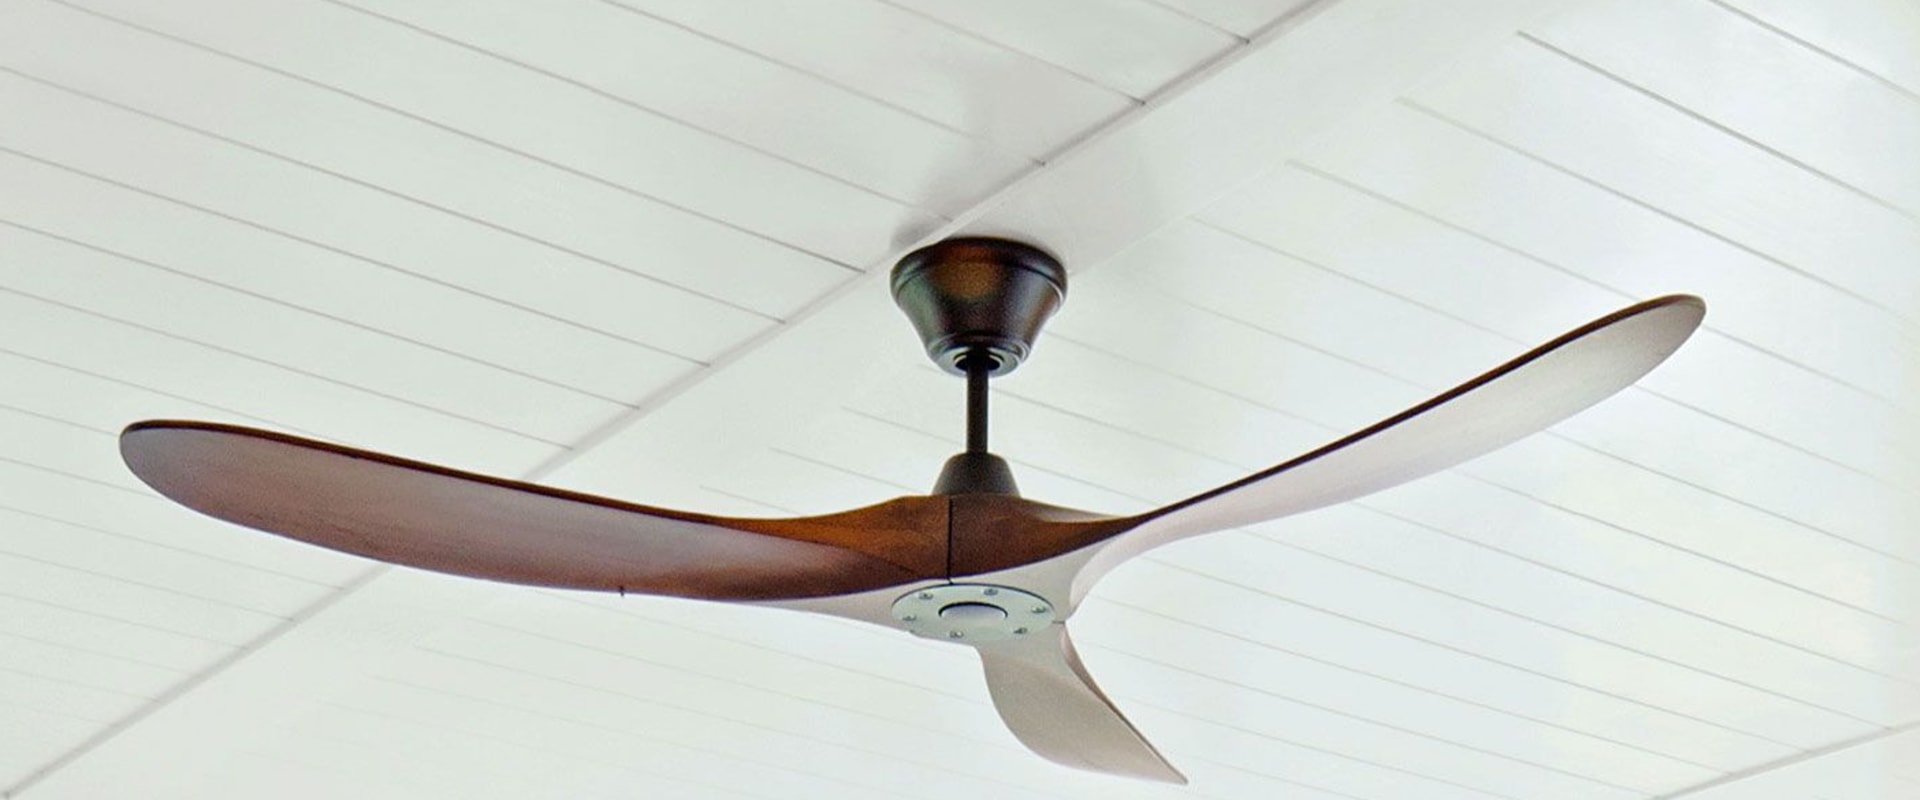 Why don't they put attic fans in houses anymore?